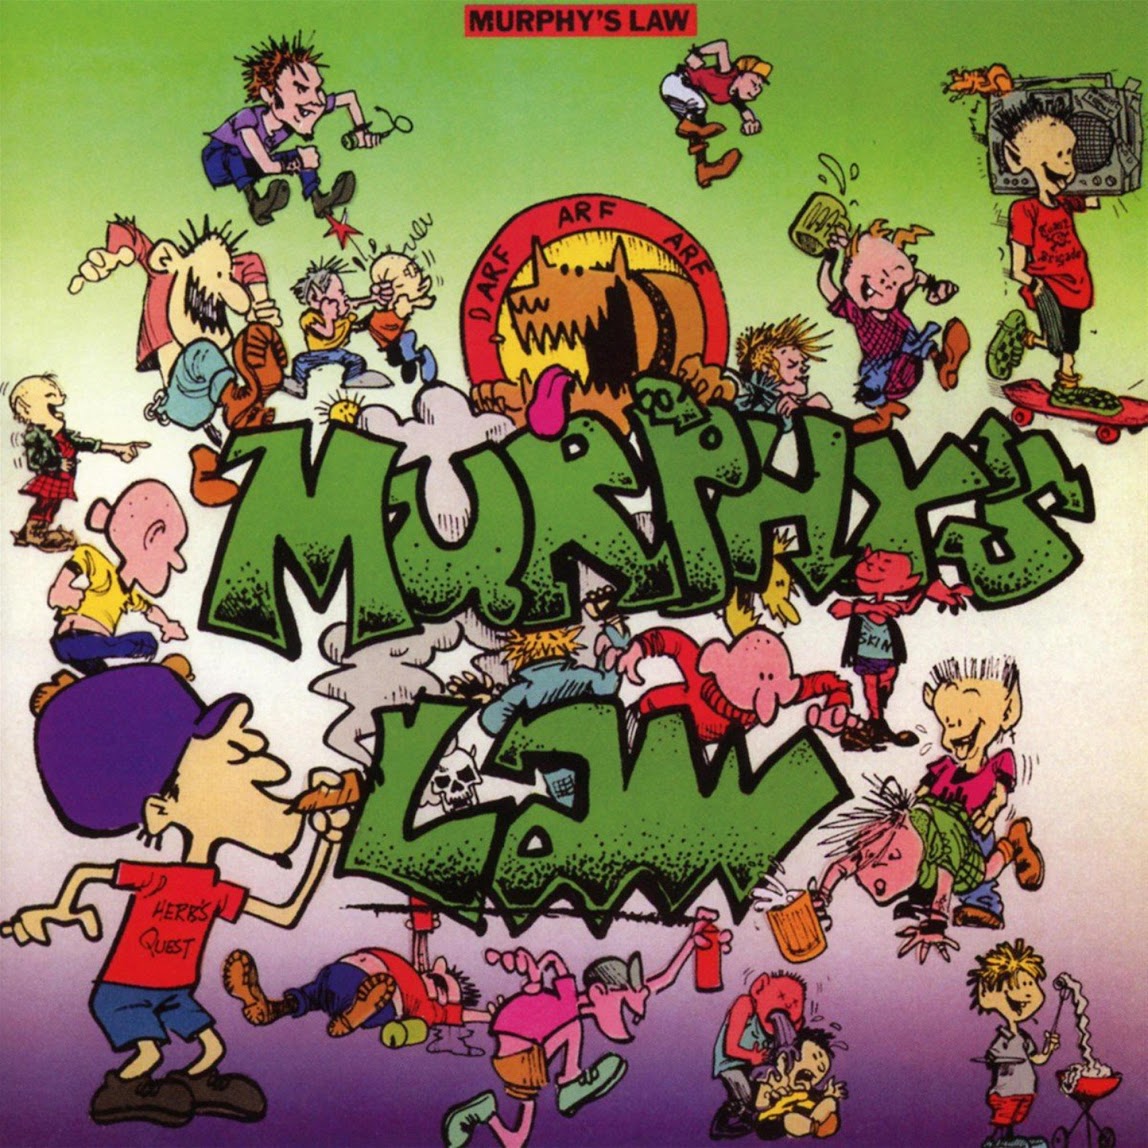 murphy-s-law-murphy-s-law-colv-red-rsd2-lp-lunchbox-records